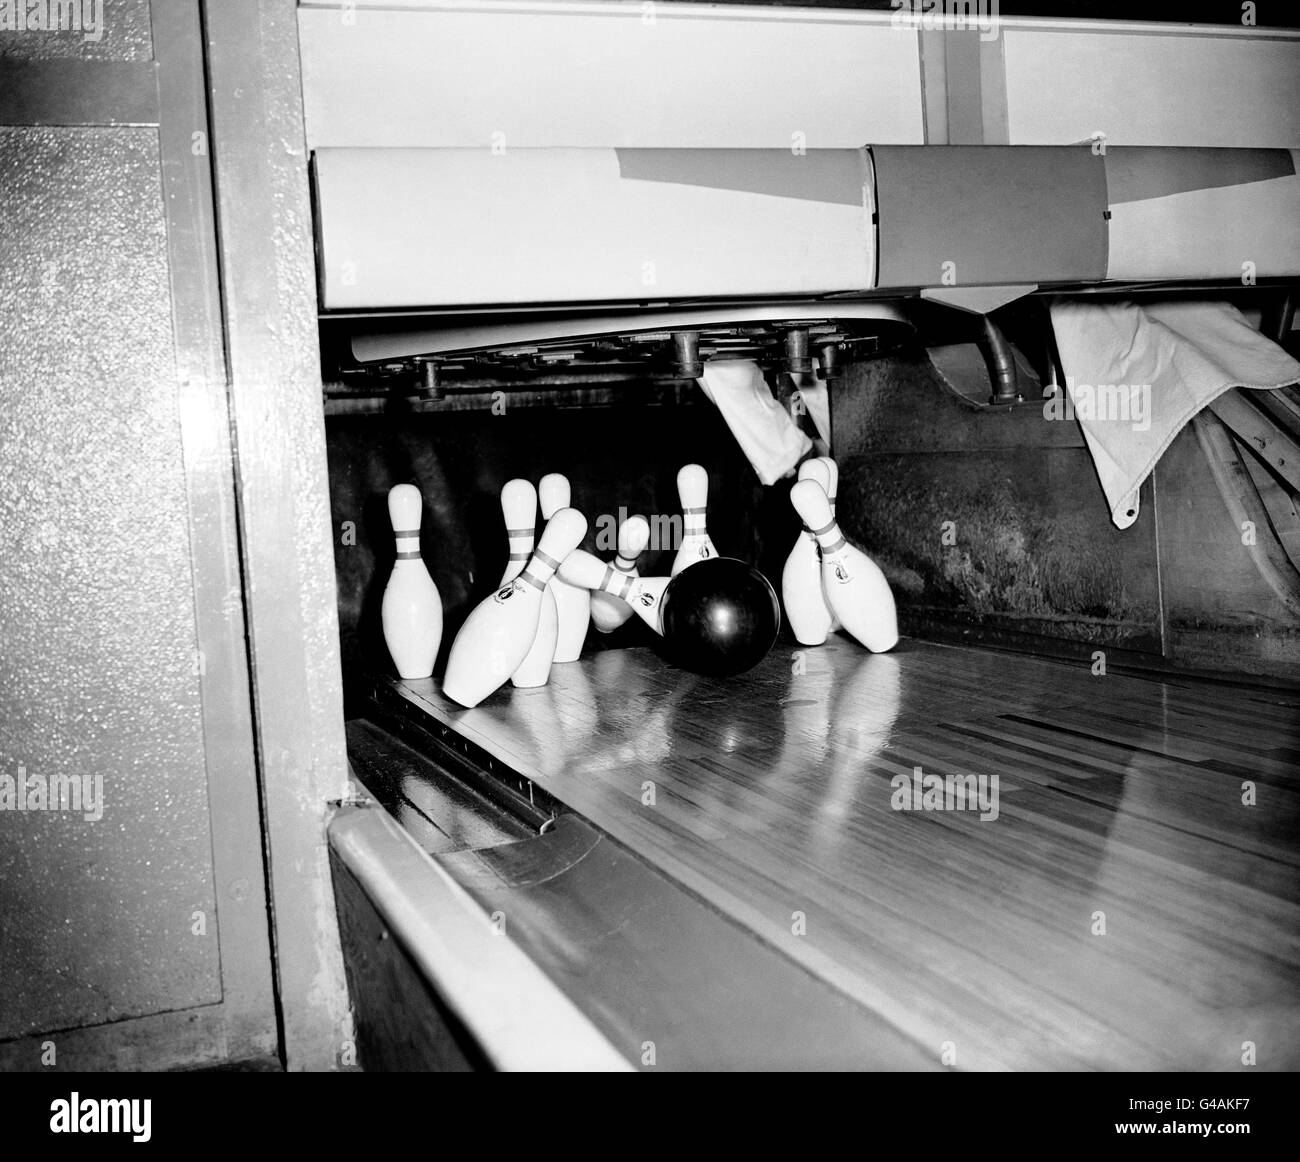 Ten Pin Bowling - United States Air Force Base - Ruislip. The 16lb solid rubber ball sends the pins flying during a game of ten pin bowling. Stock Photo